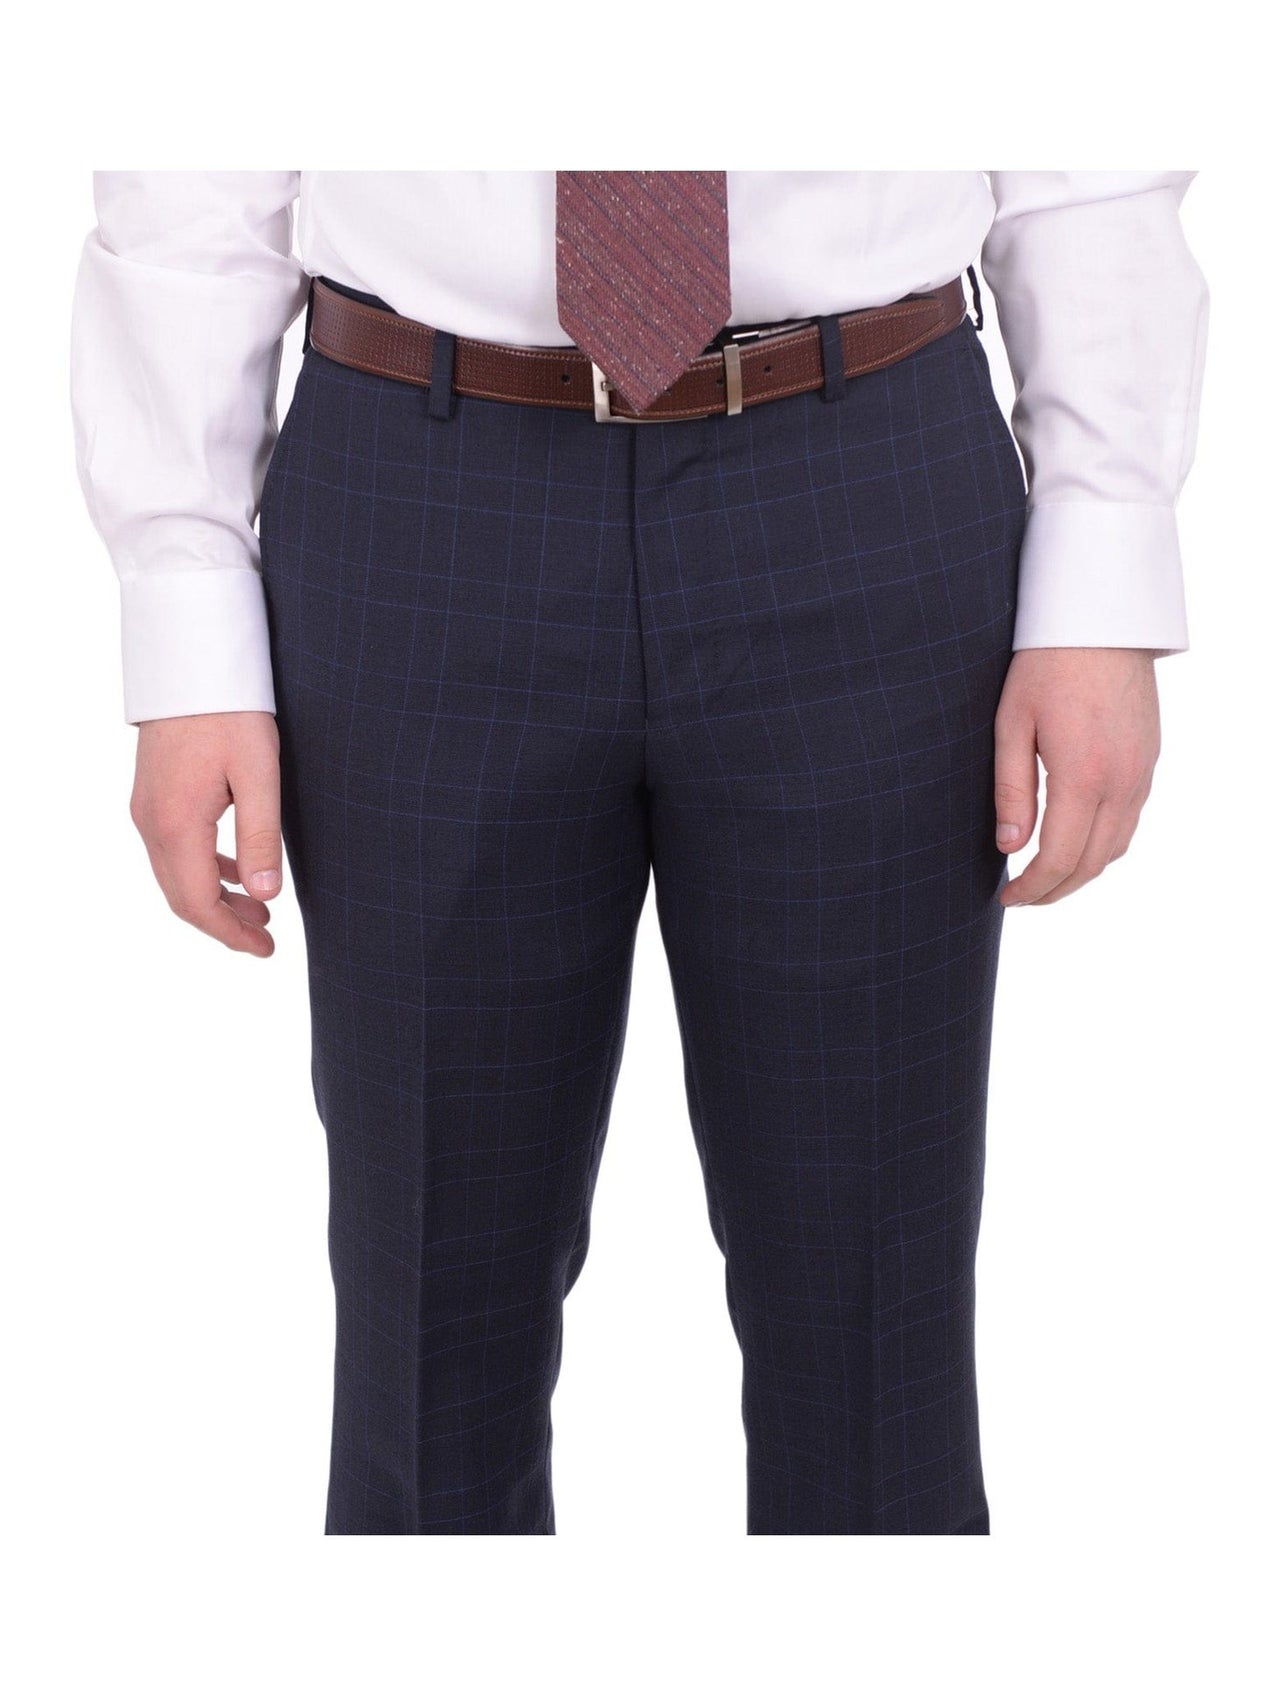 Napoli TWO PIECE SUITS Mens Napoli Slim Fit Navy Blue Plaid Half Canvassed Super 150s Wool Suit